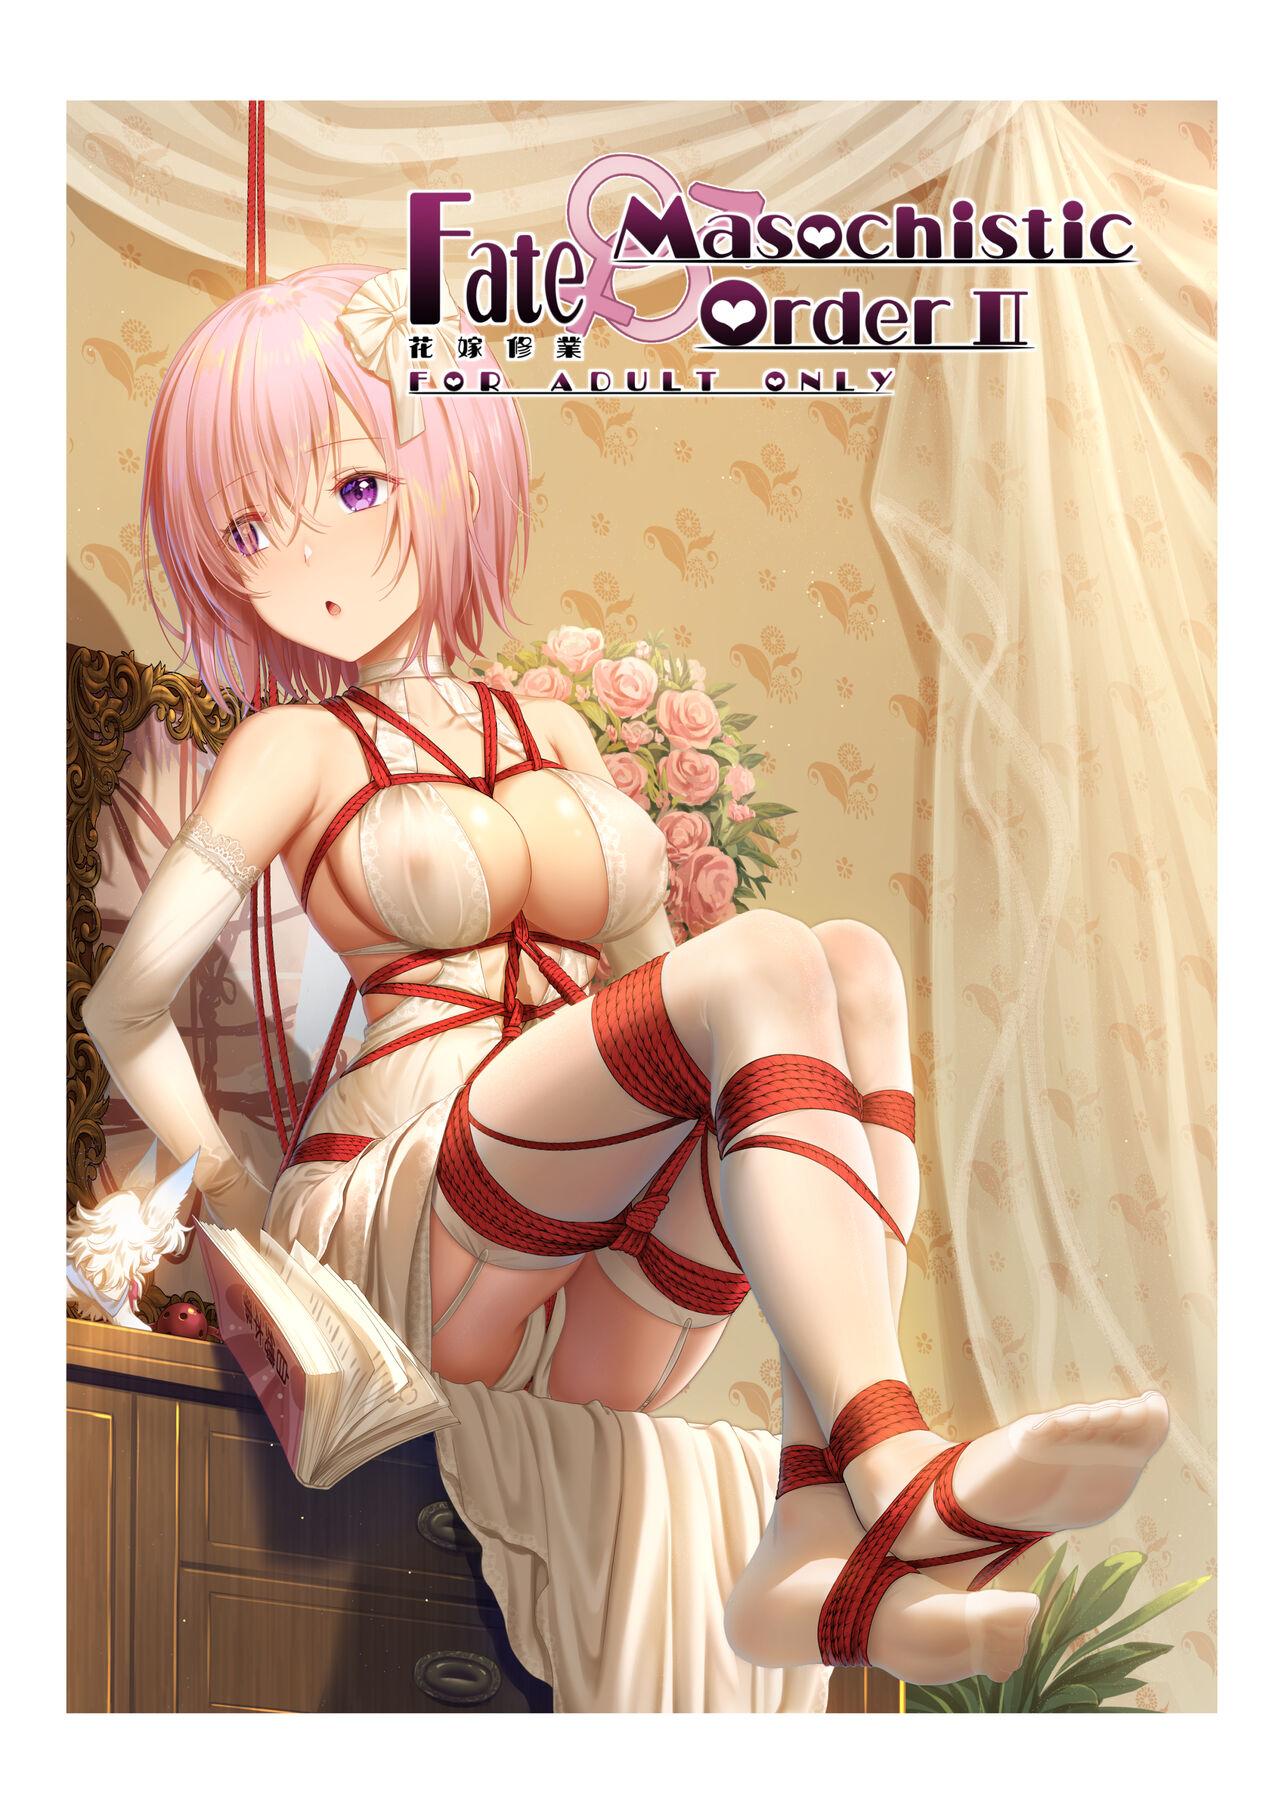 Blow Jobs Porn FATE MASOCHISTIC ORDER II Hanayome Shugyou - Fate grand order Tiny Titties - Picture 1